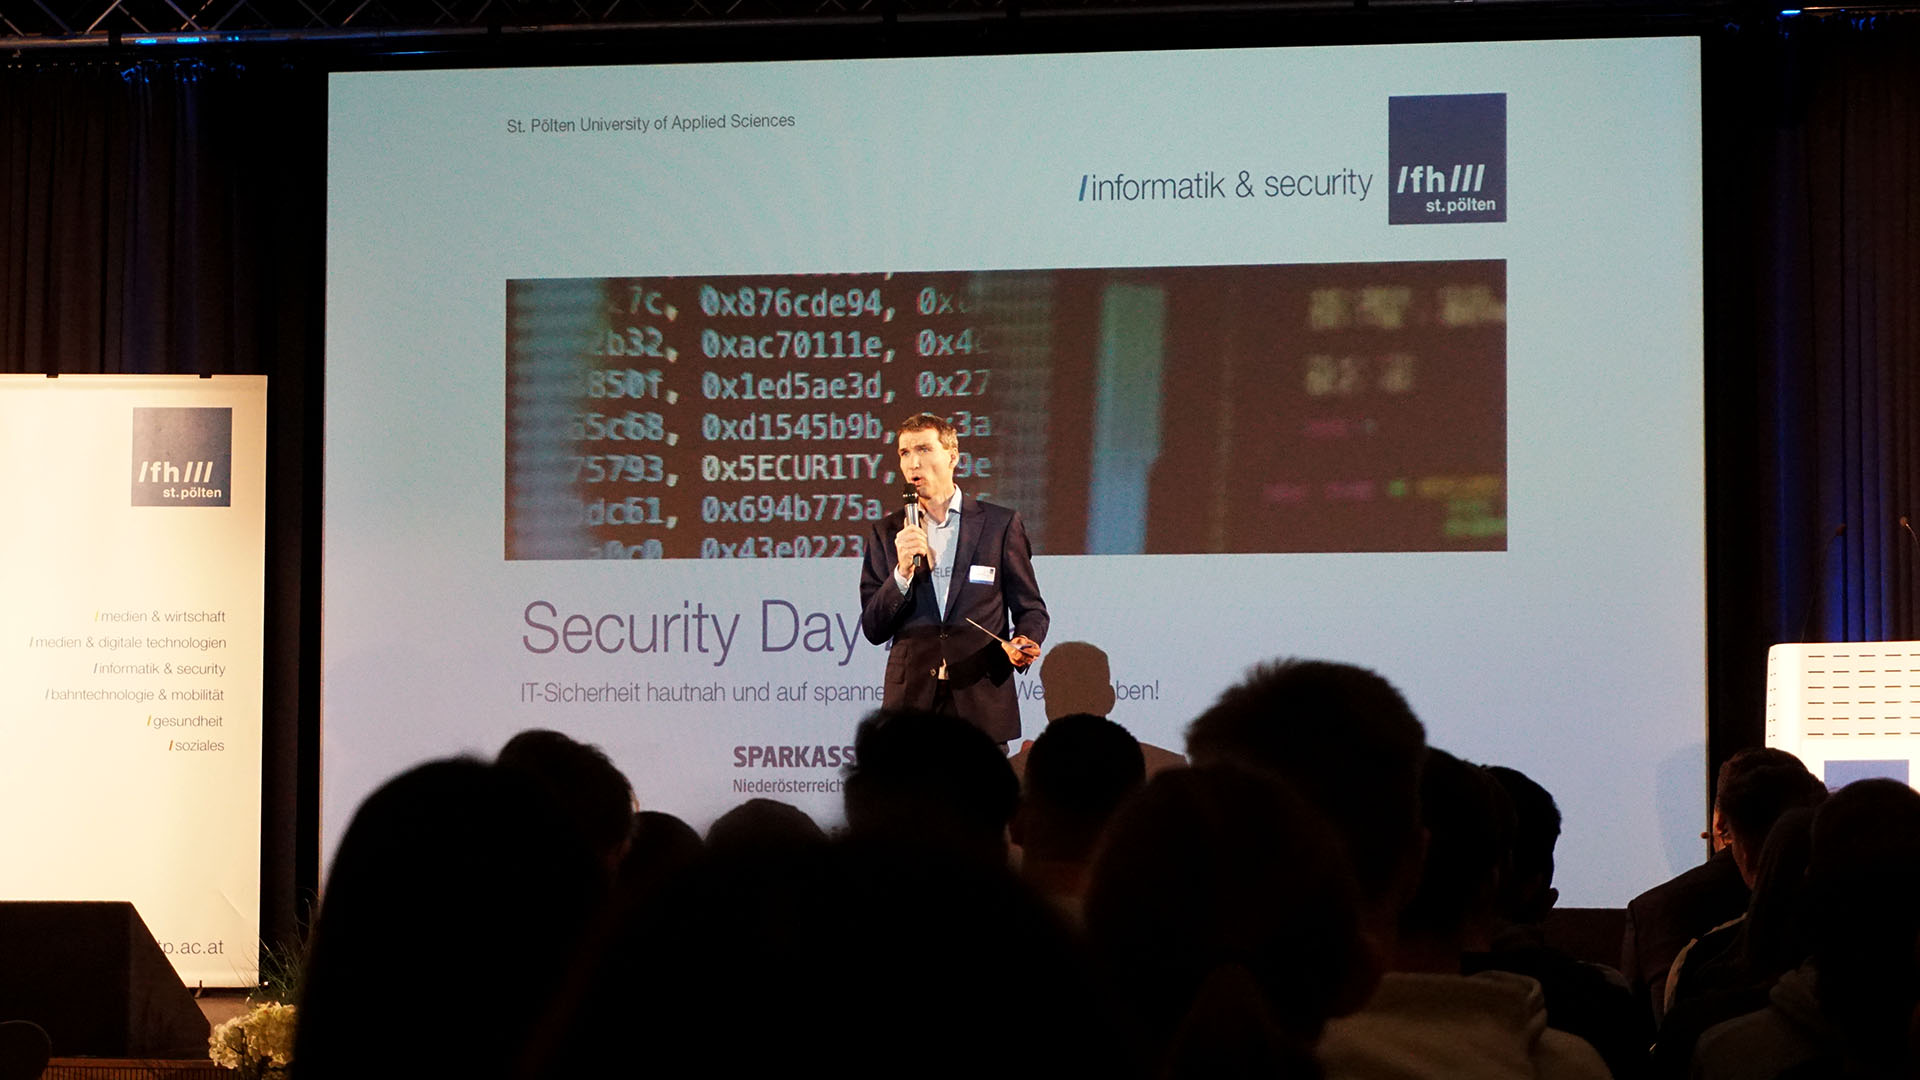 Security Day